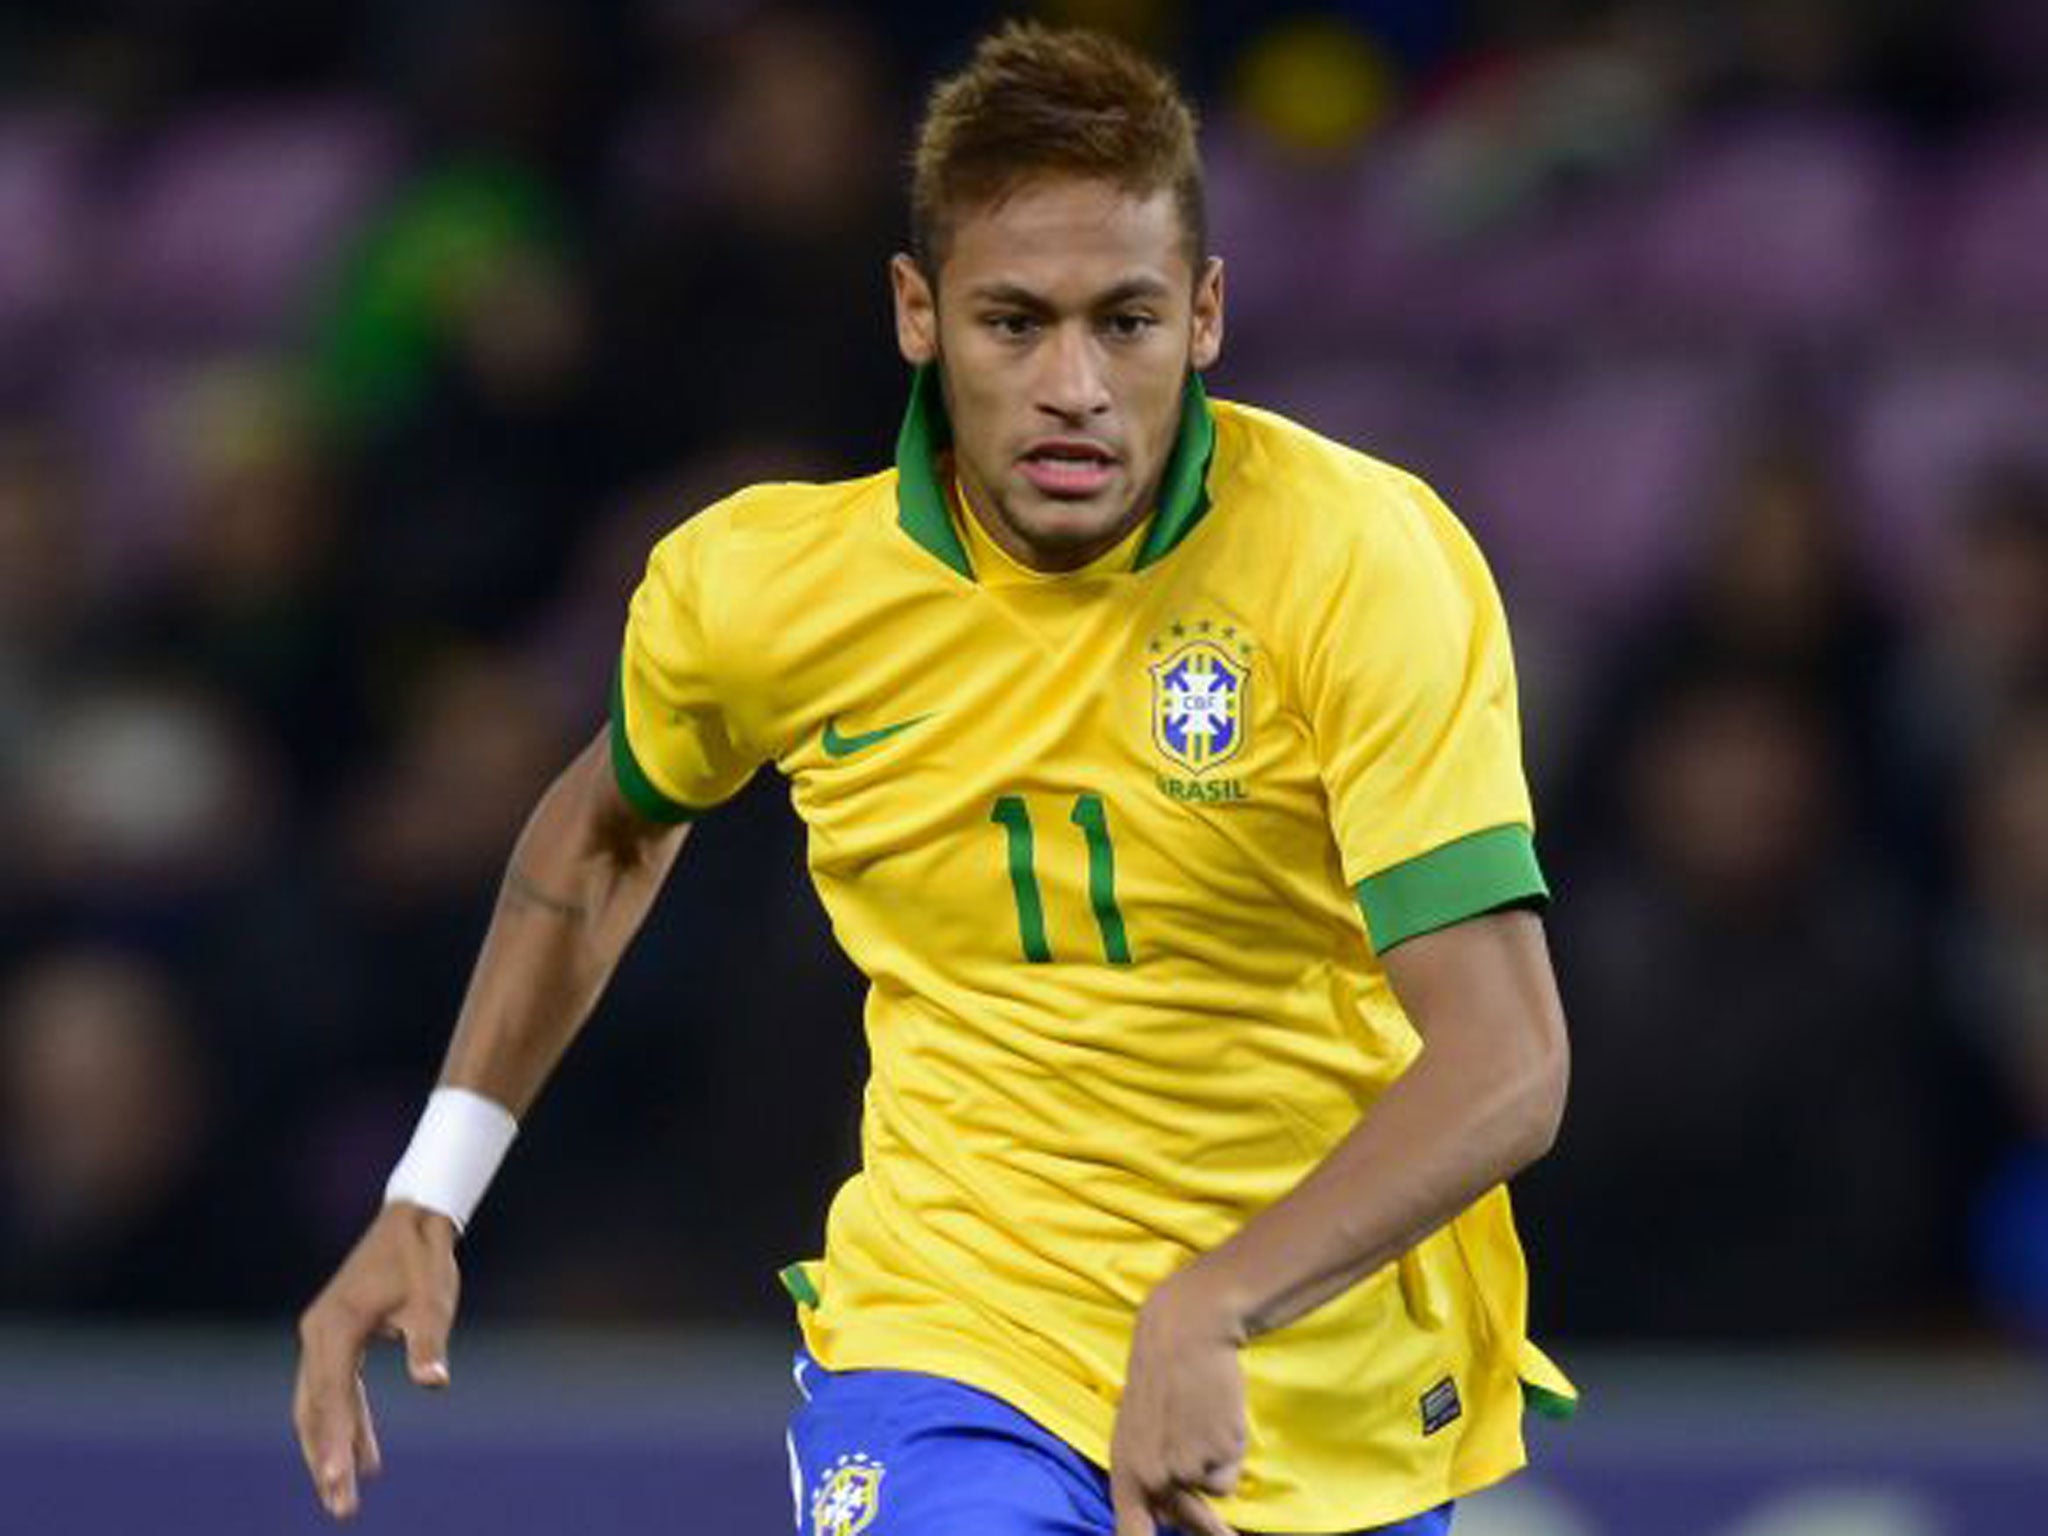 Neymar: A nation’s hopes hang on the 21-year-old’s slender shoulders. He signed for Barcelona last week for £31m and has plenty of tricks, but can he dominate a tournament?